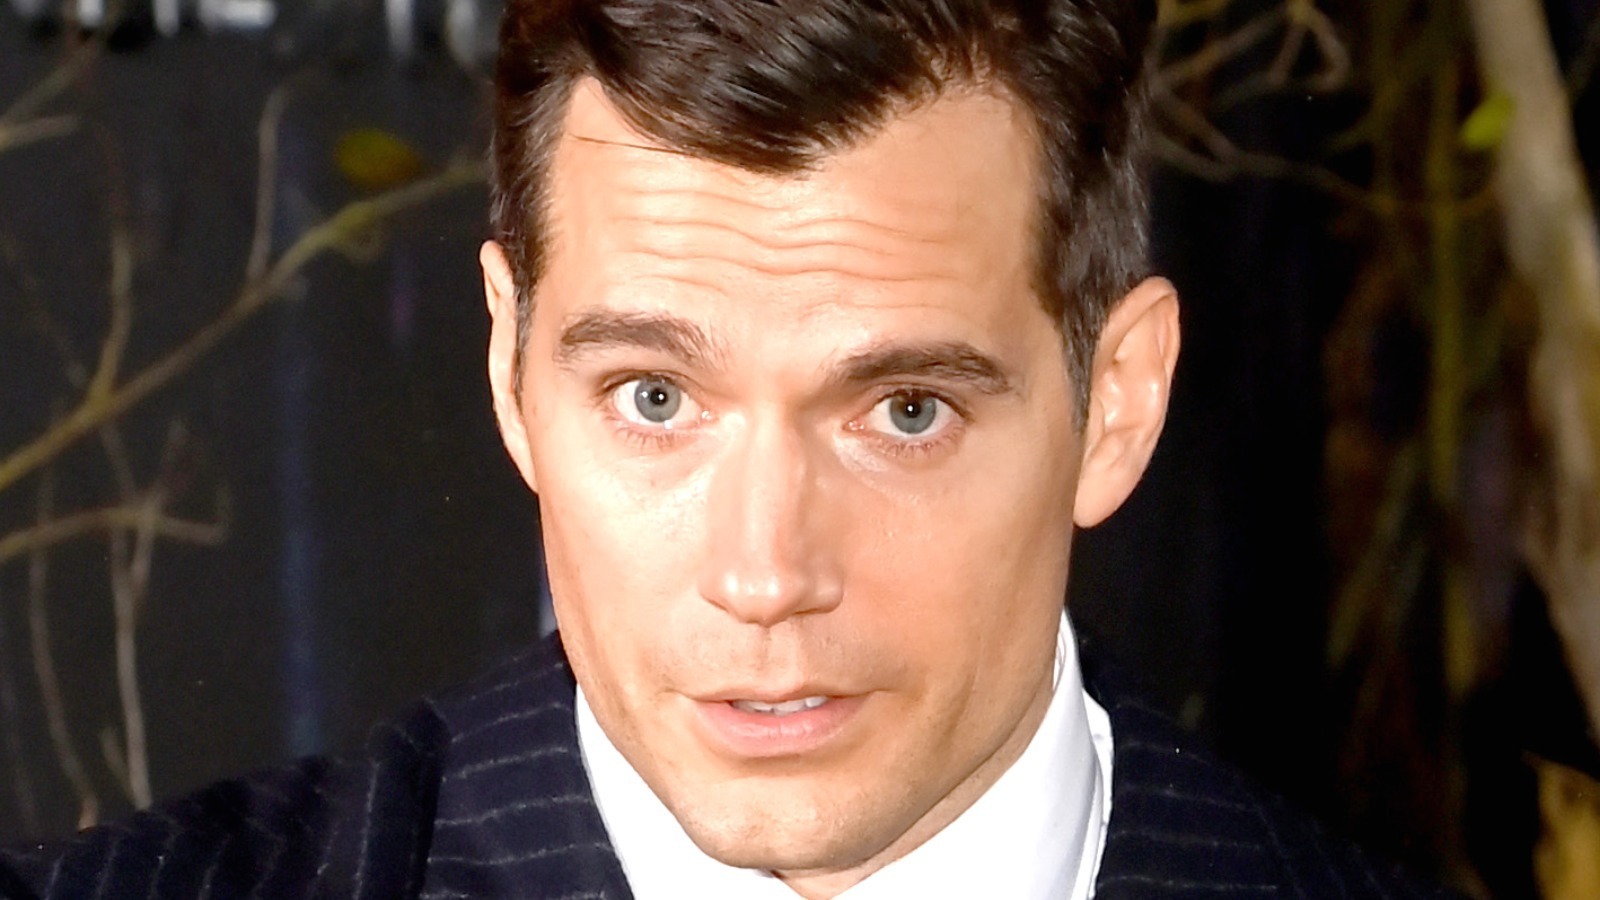 Henry Cavill (Actor) - On This Day